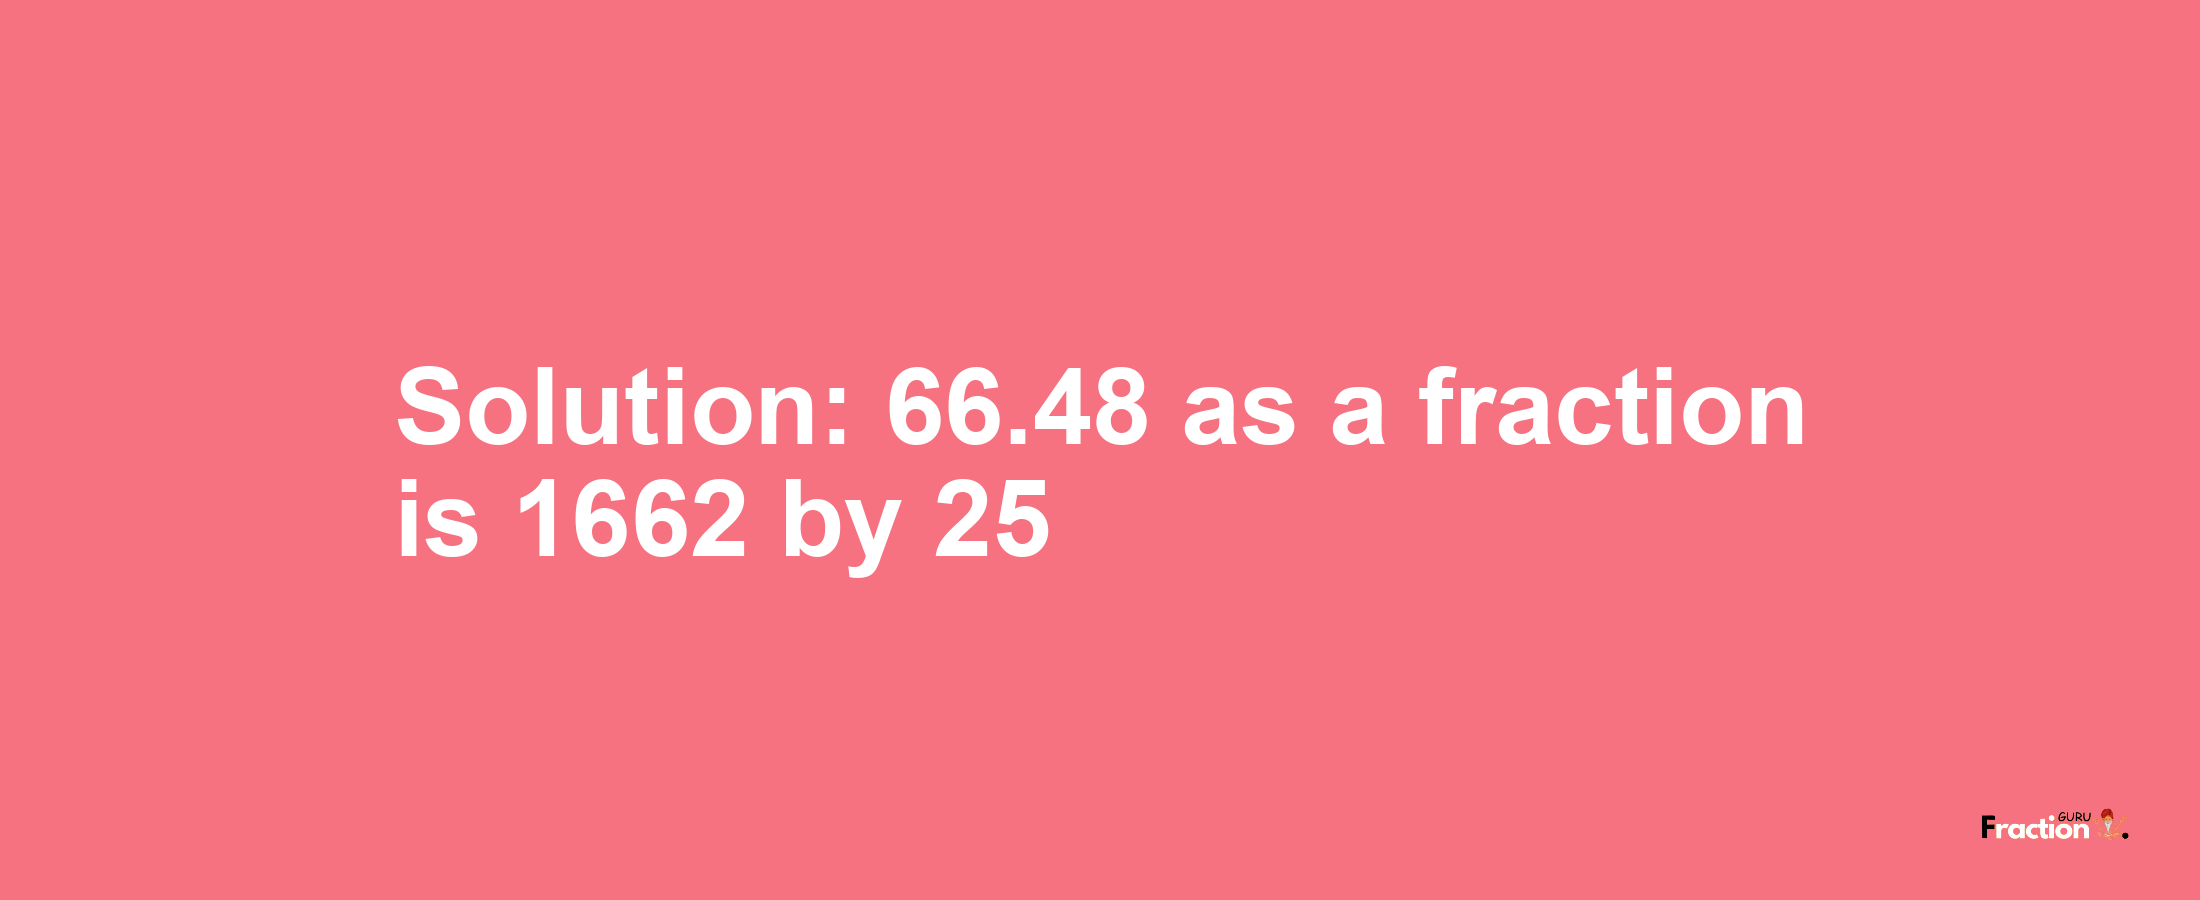 Solution:66.48 as a fraction is 1662/25